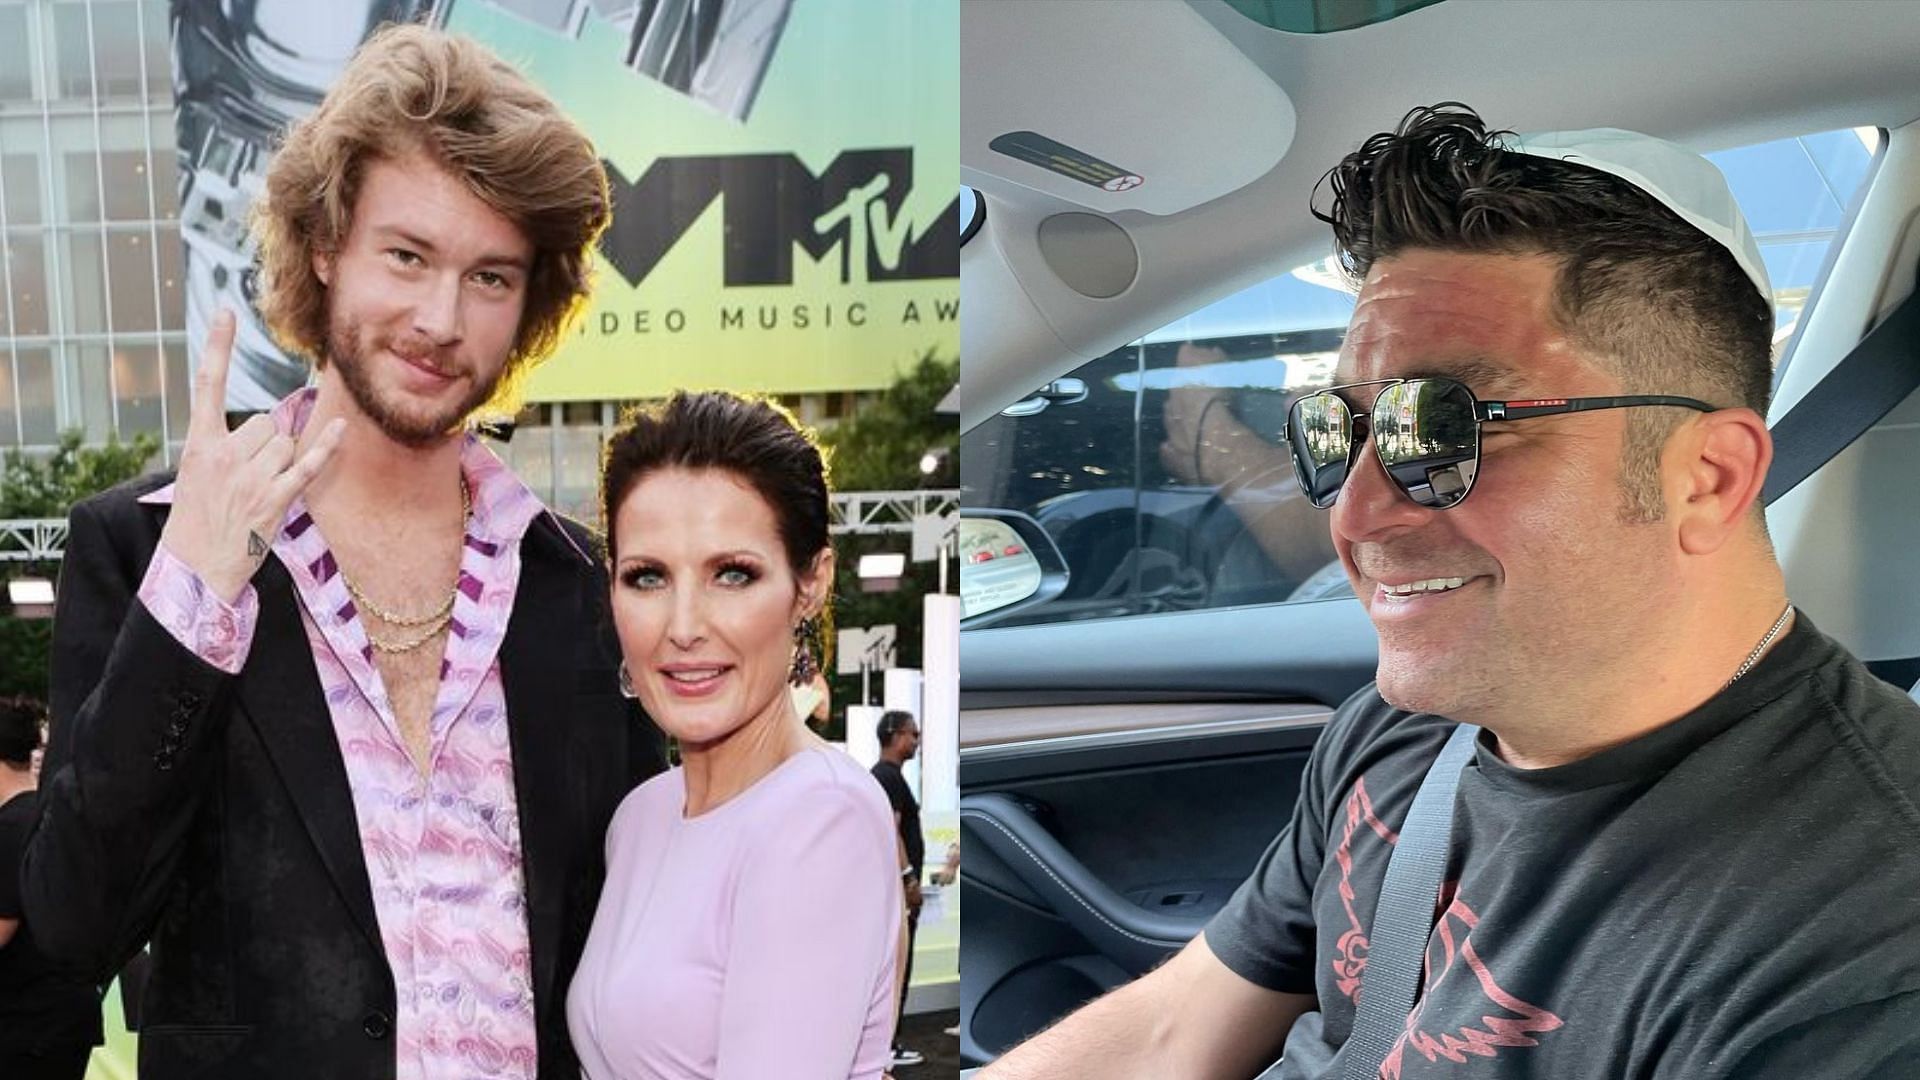 Sheri Easterling and Monty Lopez's TikTok feud explained as